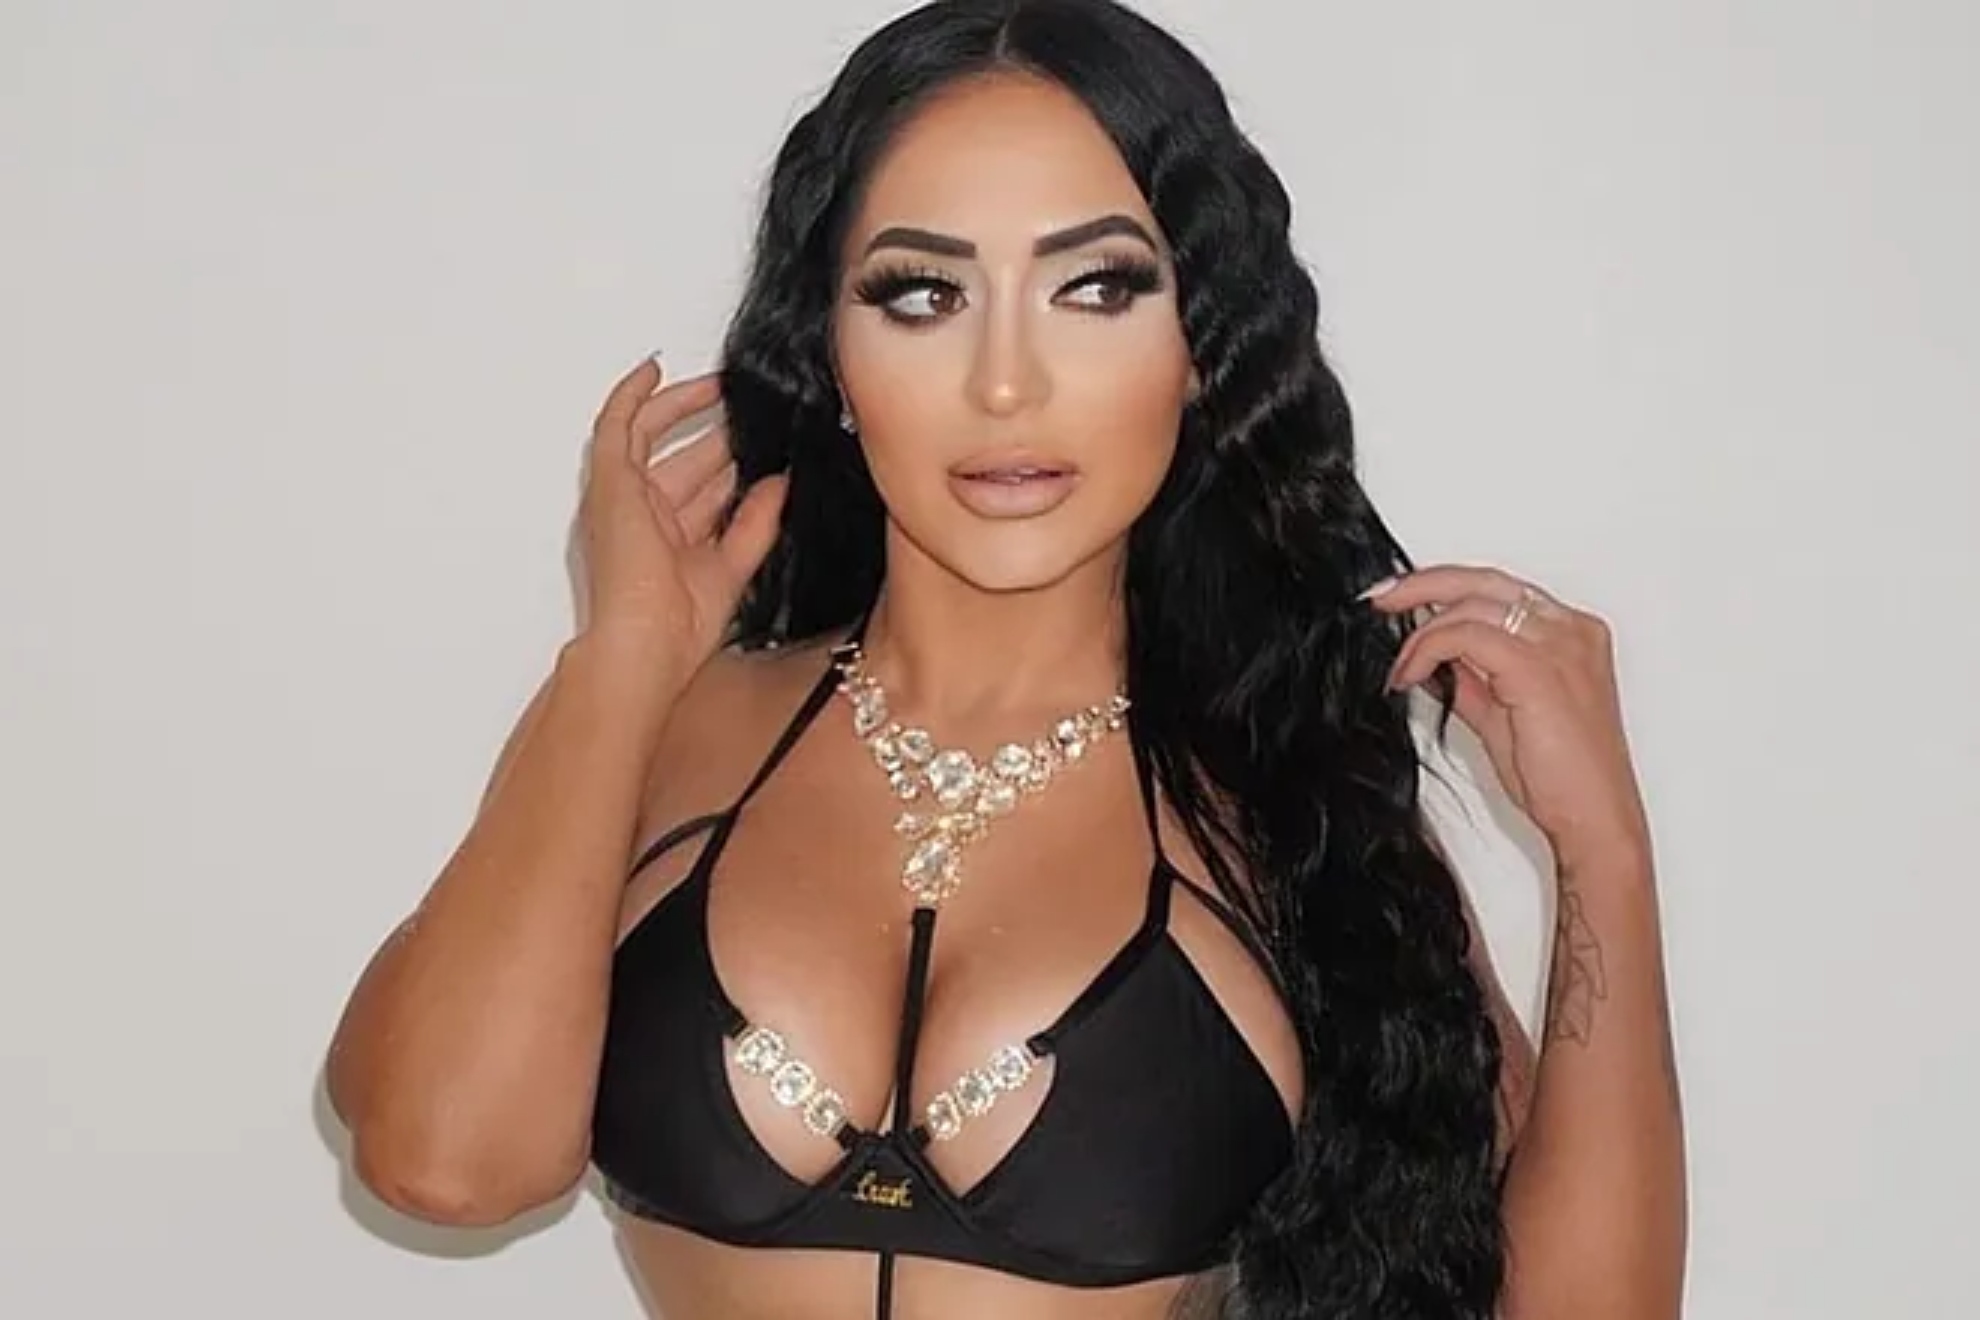 Jersey Shore star Angelina Pivarnick puts Nick Bawden on the hot seat after disclosing he was in her DMs